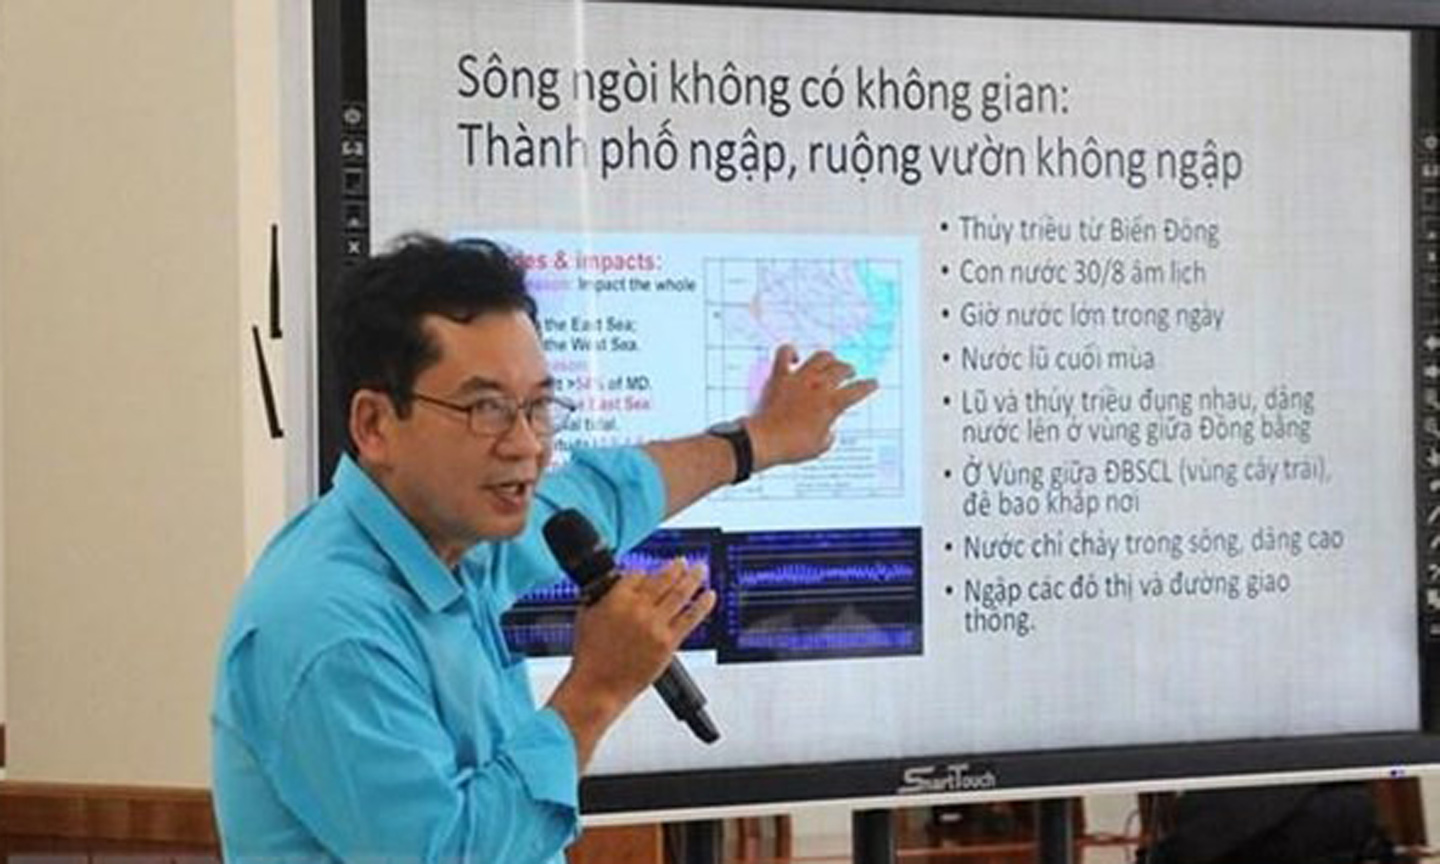 Low, late floods worsen saline intrusion in Mekong Delta: experts hinh anh 1Expert on the delta's ecosystem Nguyen Huu Thien speaks at the event (Photo: VNA)